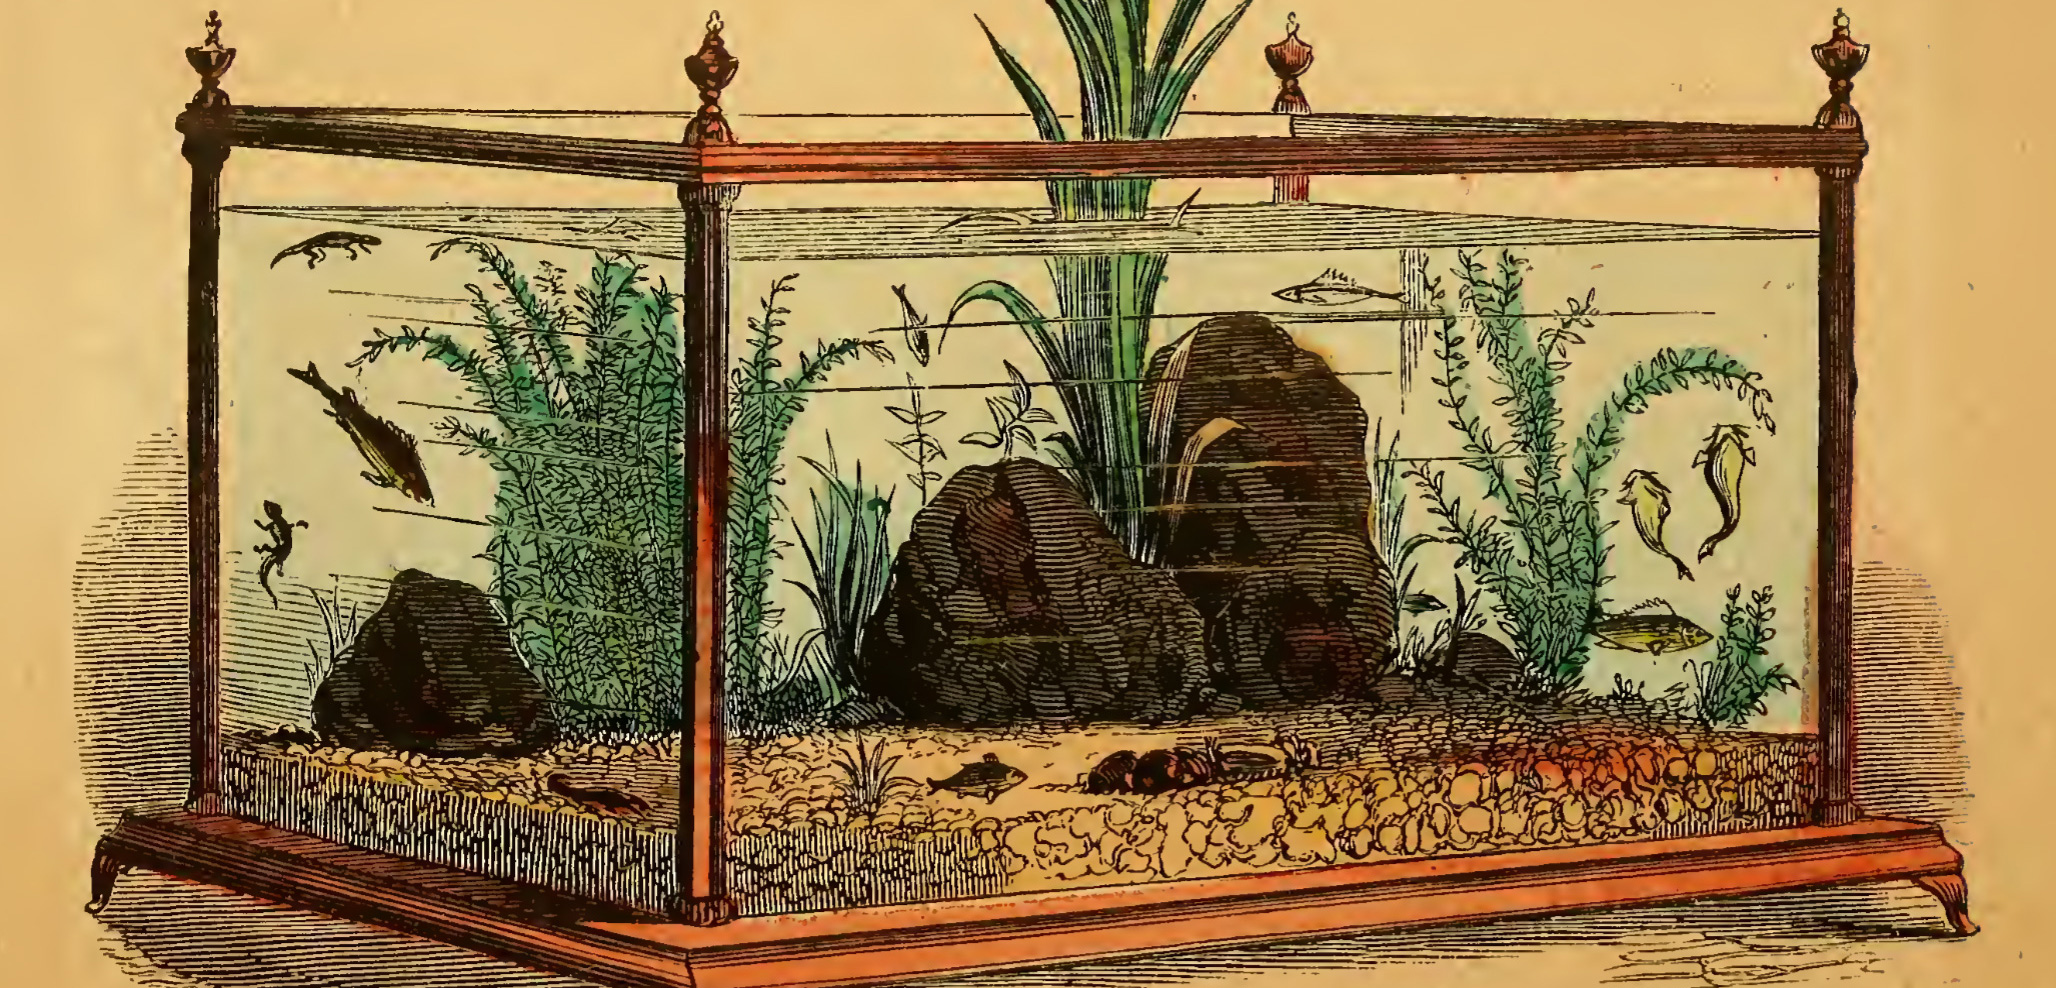 This image is from Henry D. Butler’s 1858 book, The Family Aquarium, one of the first step-by-step guides to maintaining a home aquarium.